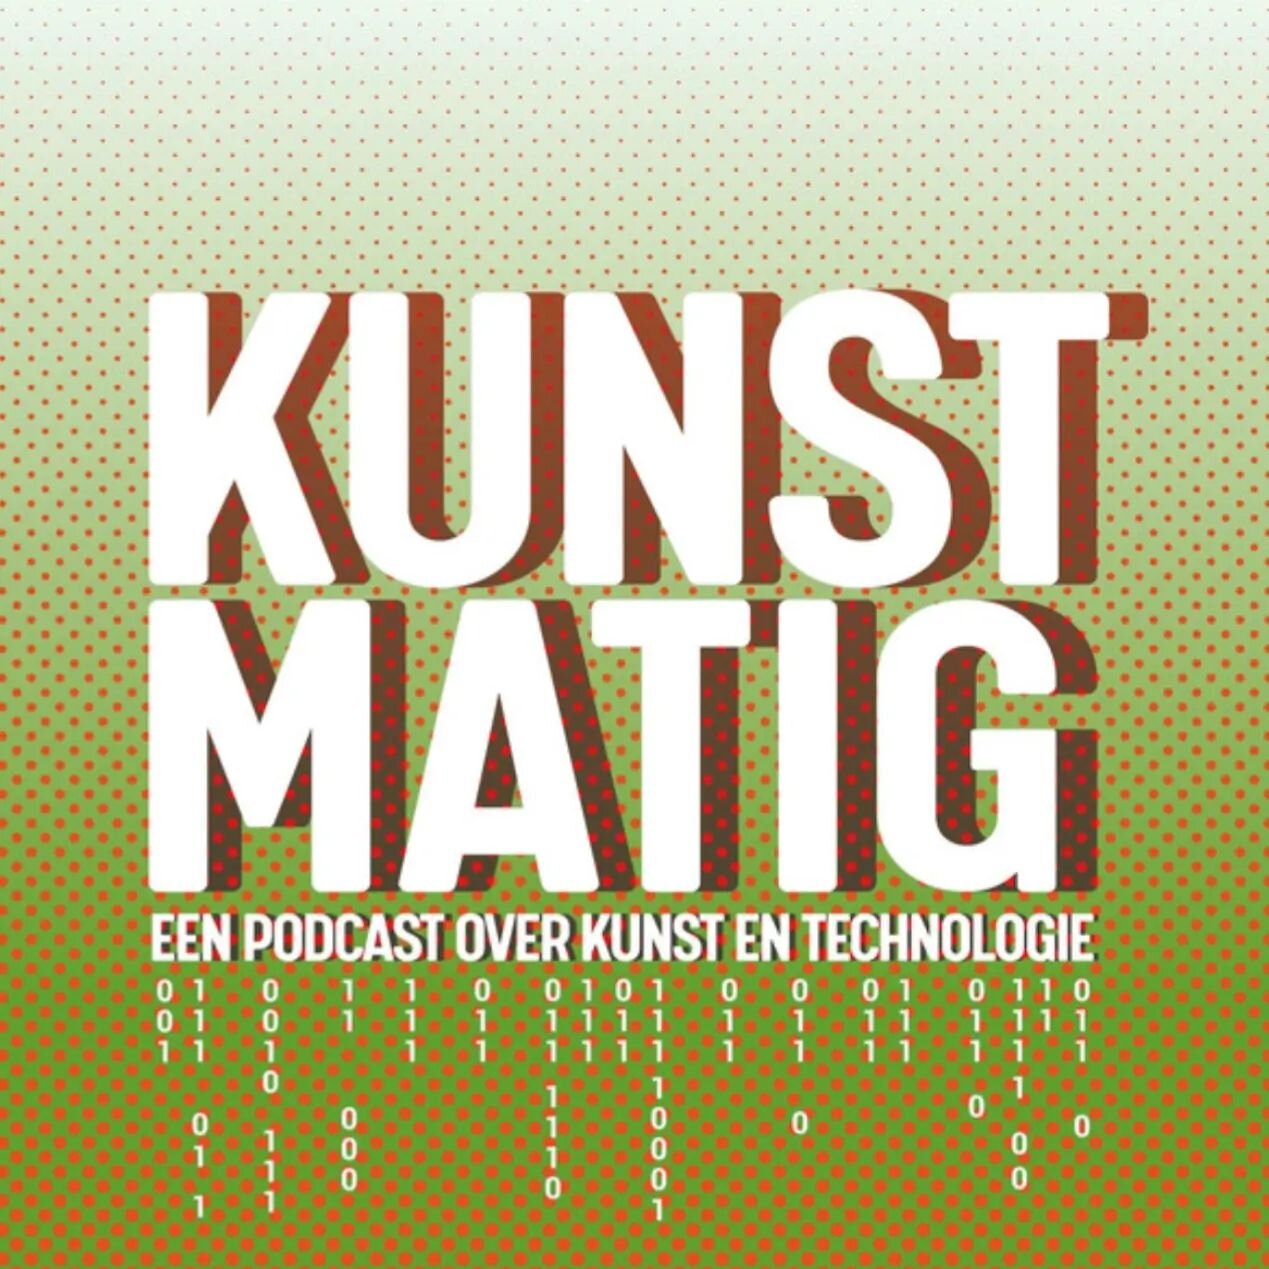 Oops.. a bit late!

@kunstmatigdepodcast made a very interesting episode about the exhibition 'GARDENING' last summer!
(And they also talk about 'Microcosm' :) )
It's number #17, but ofcourse you can also listen to the other episodes while you're at 